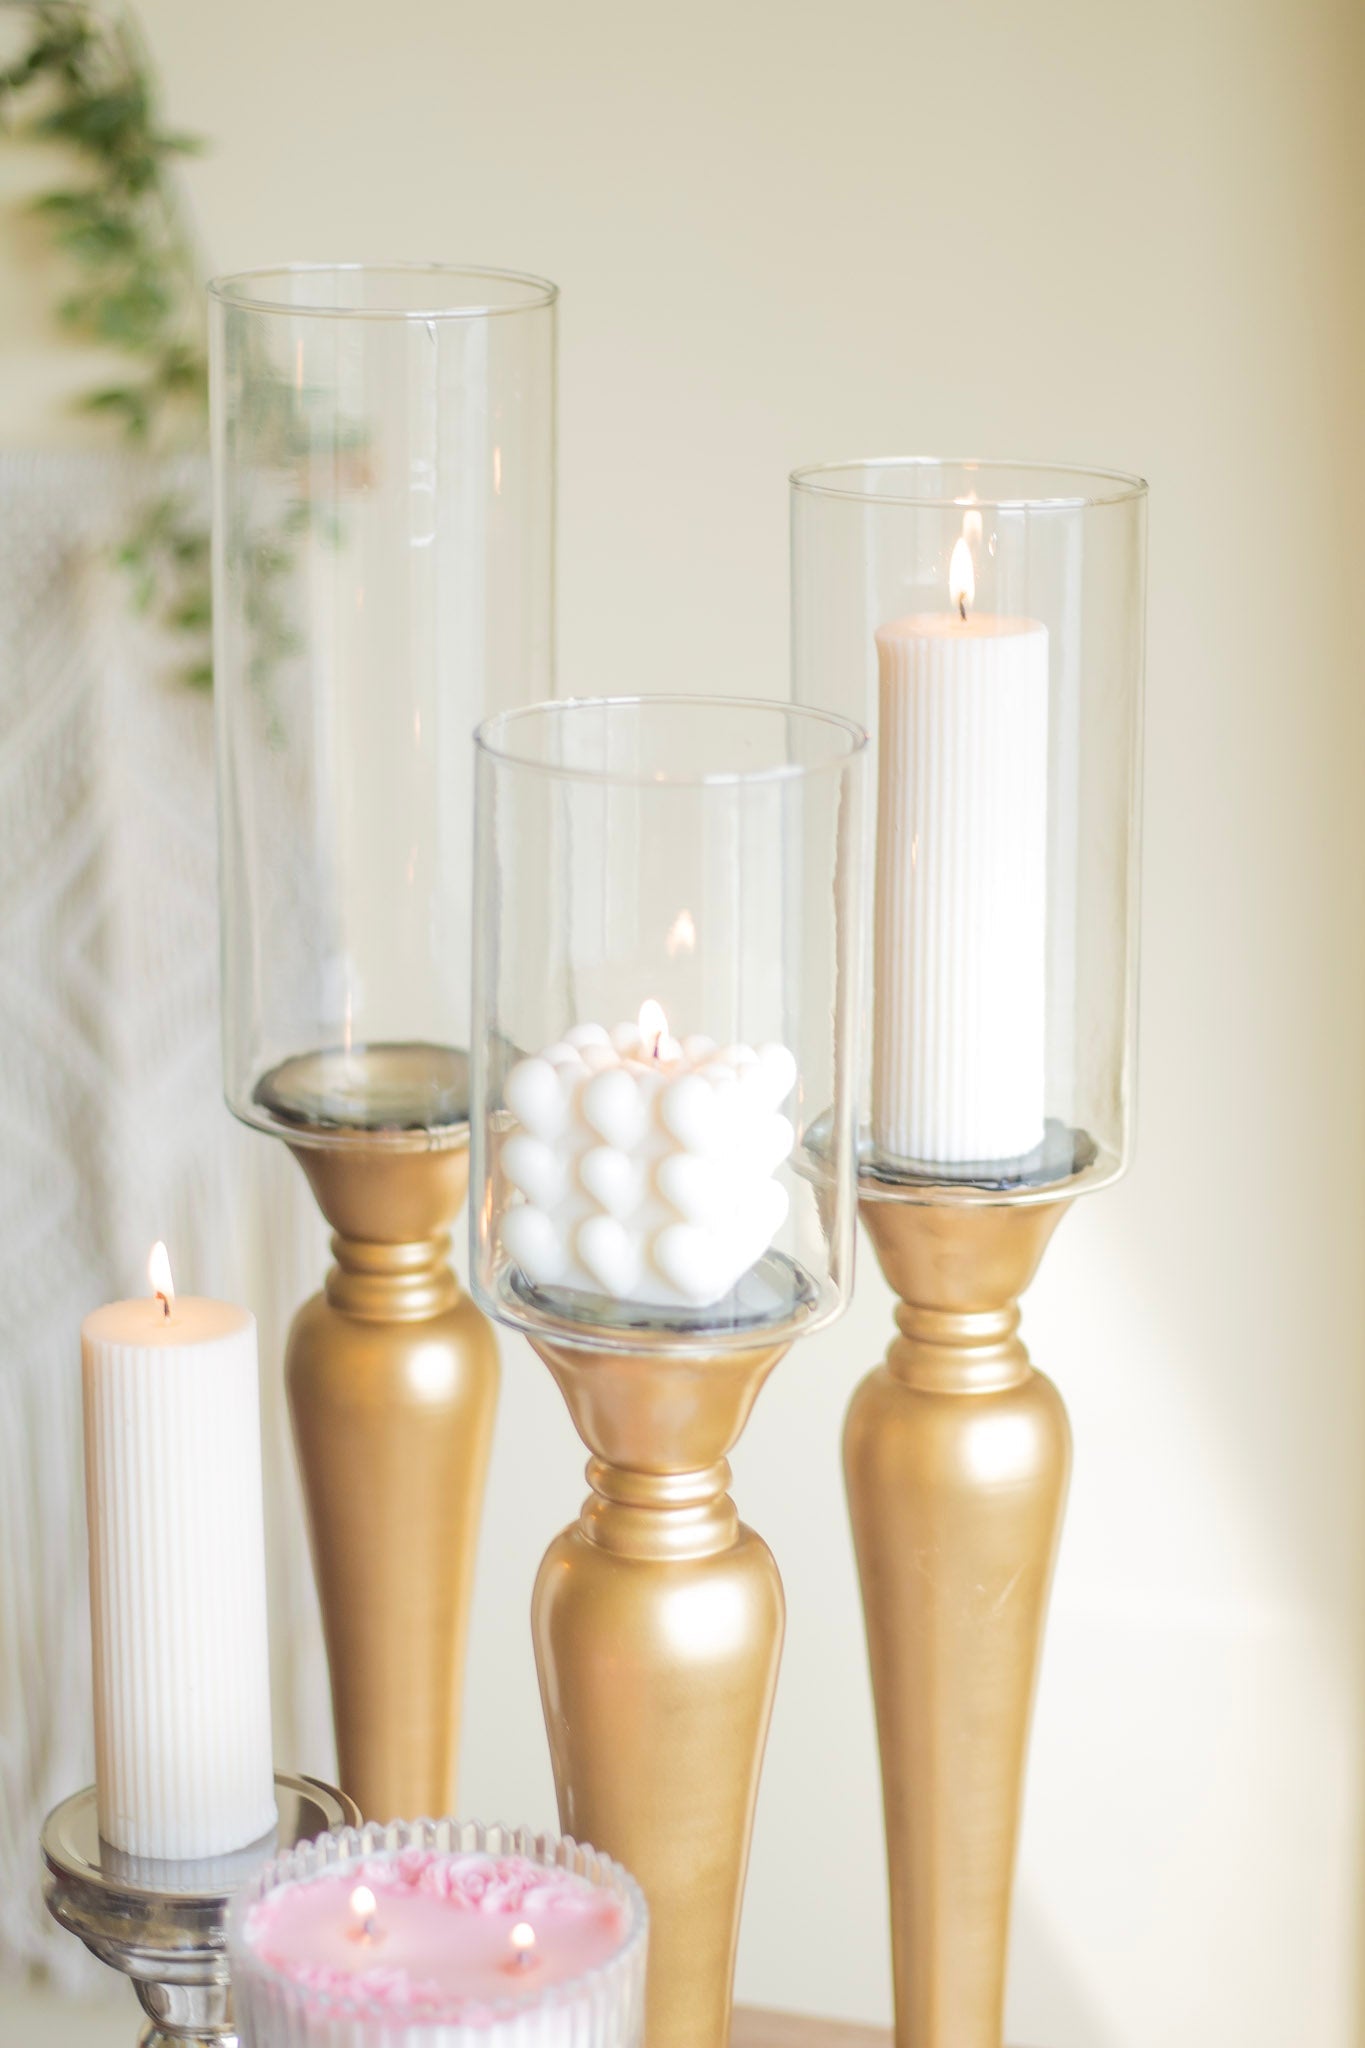 Extra Long Elegant Looking Candle Holder | Set Of 3 Home Decor